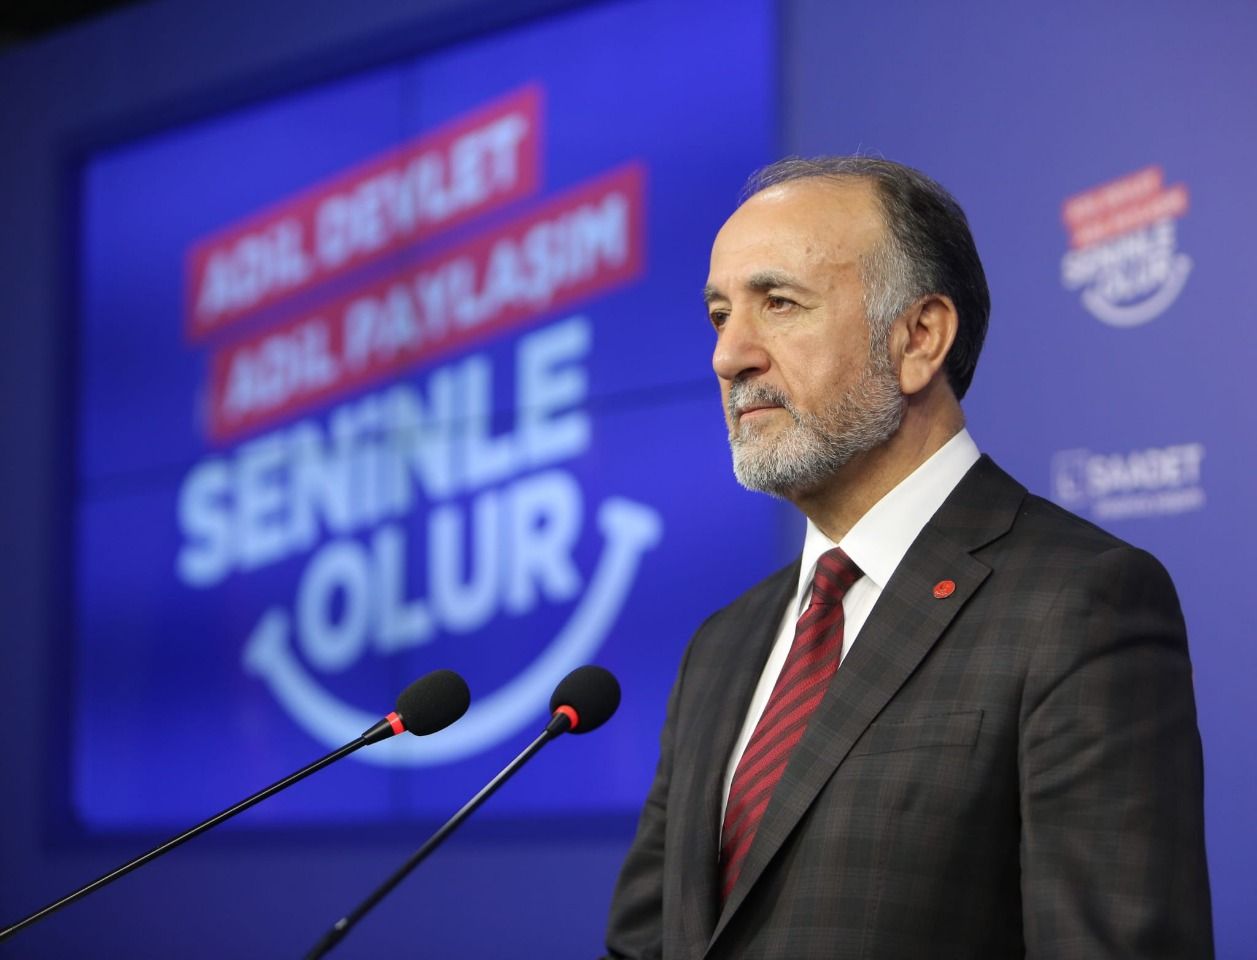 Güneş: “The bread in the stomach of the citizen is getting smaller”